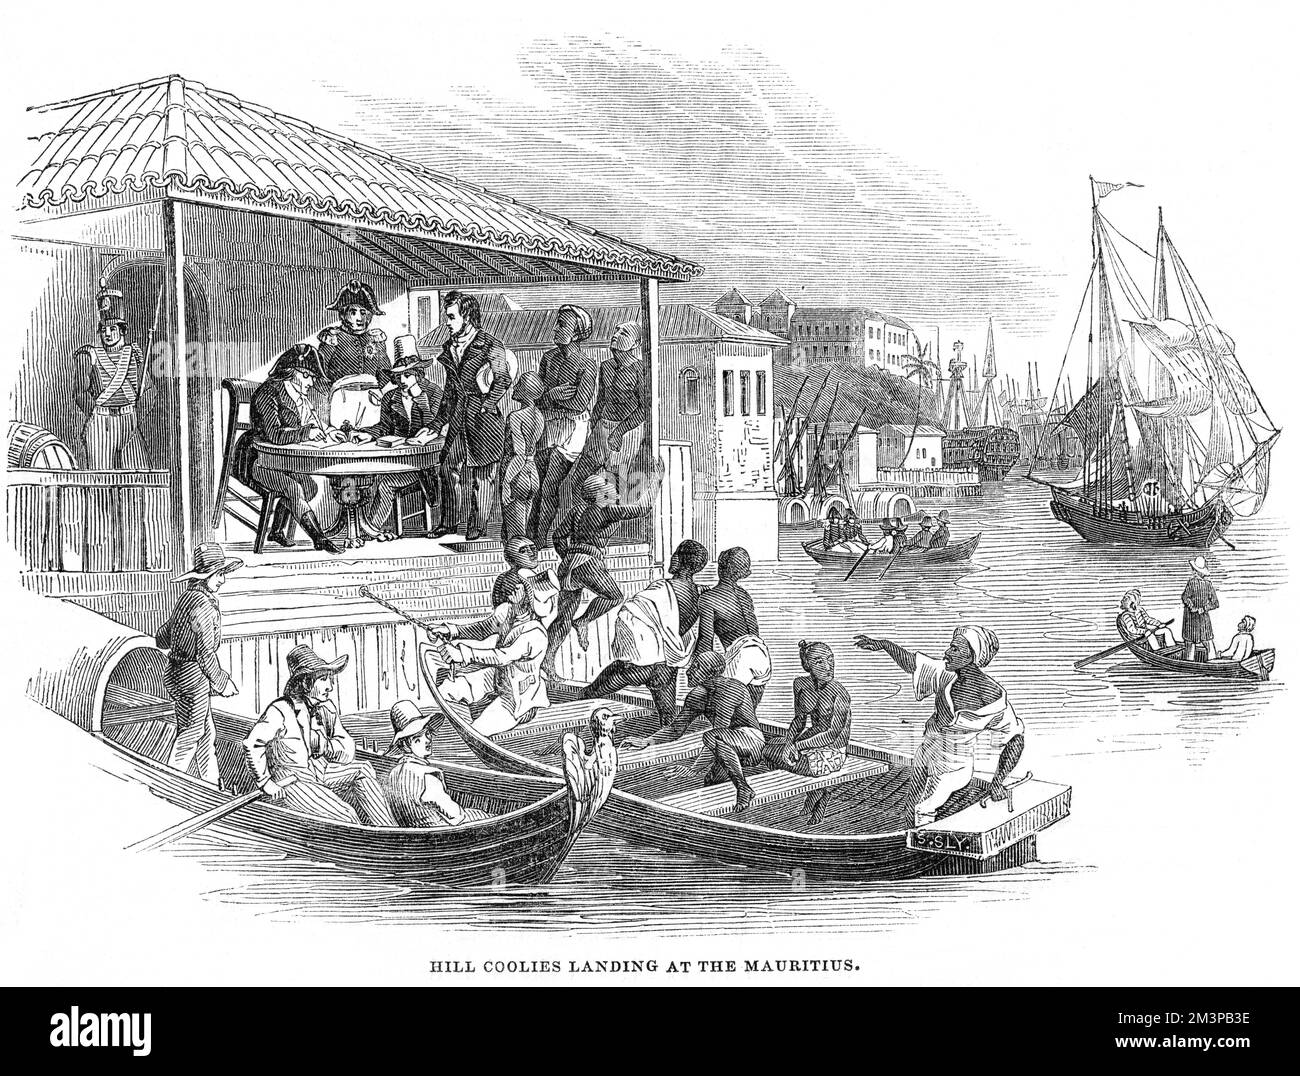 Hill coolies landing at Mauritius, 1842. Coolies were imported as labour to work for the merchants and planters of Mauritius, and were treated as virtual slaves. The Illustrated London News reproduced this image on their front cover 6th August 1842 to highlight the plight of the coolies.  1842 Stock Photo